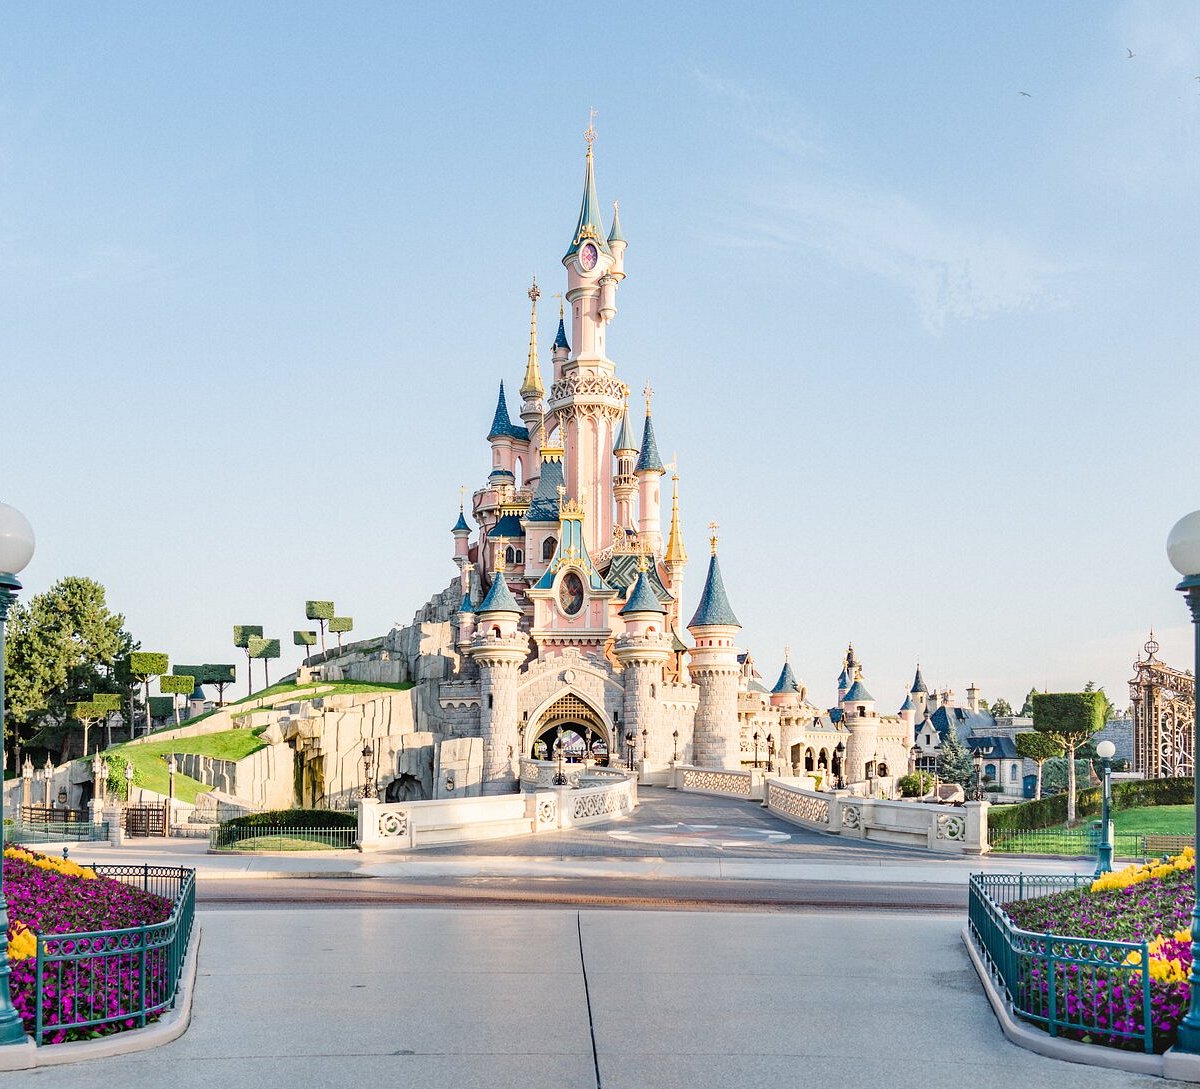 Disneyland Paris (Marne-La-Vallee) - All You Need To Know Before You Go